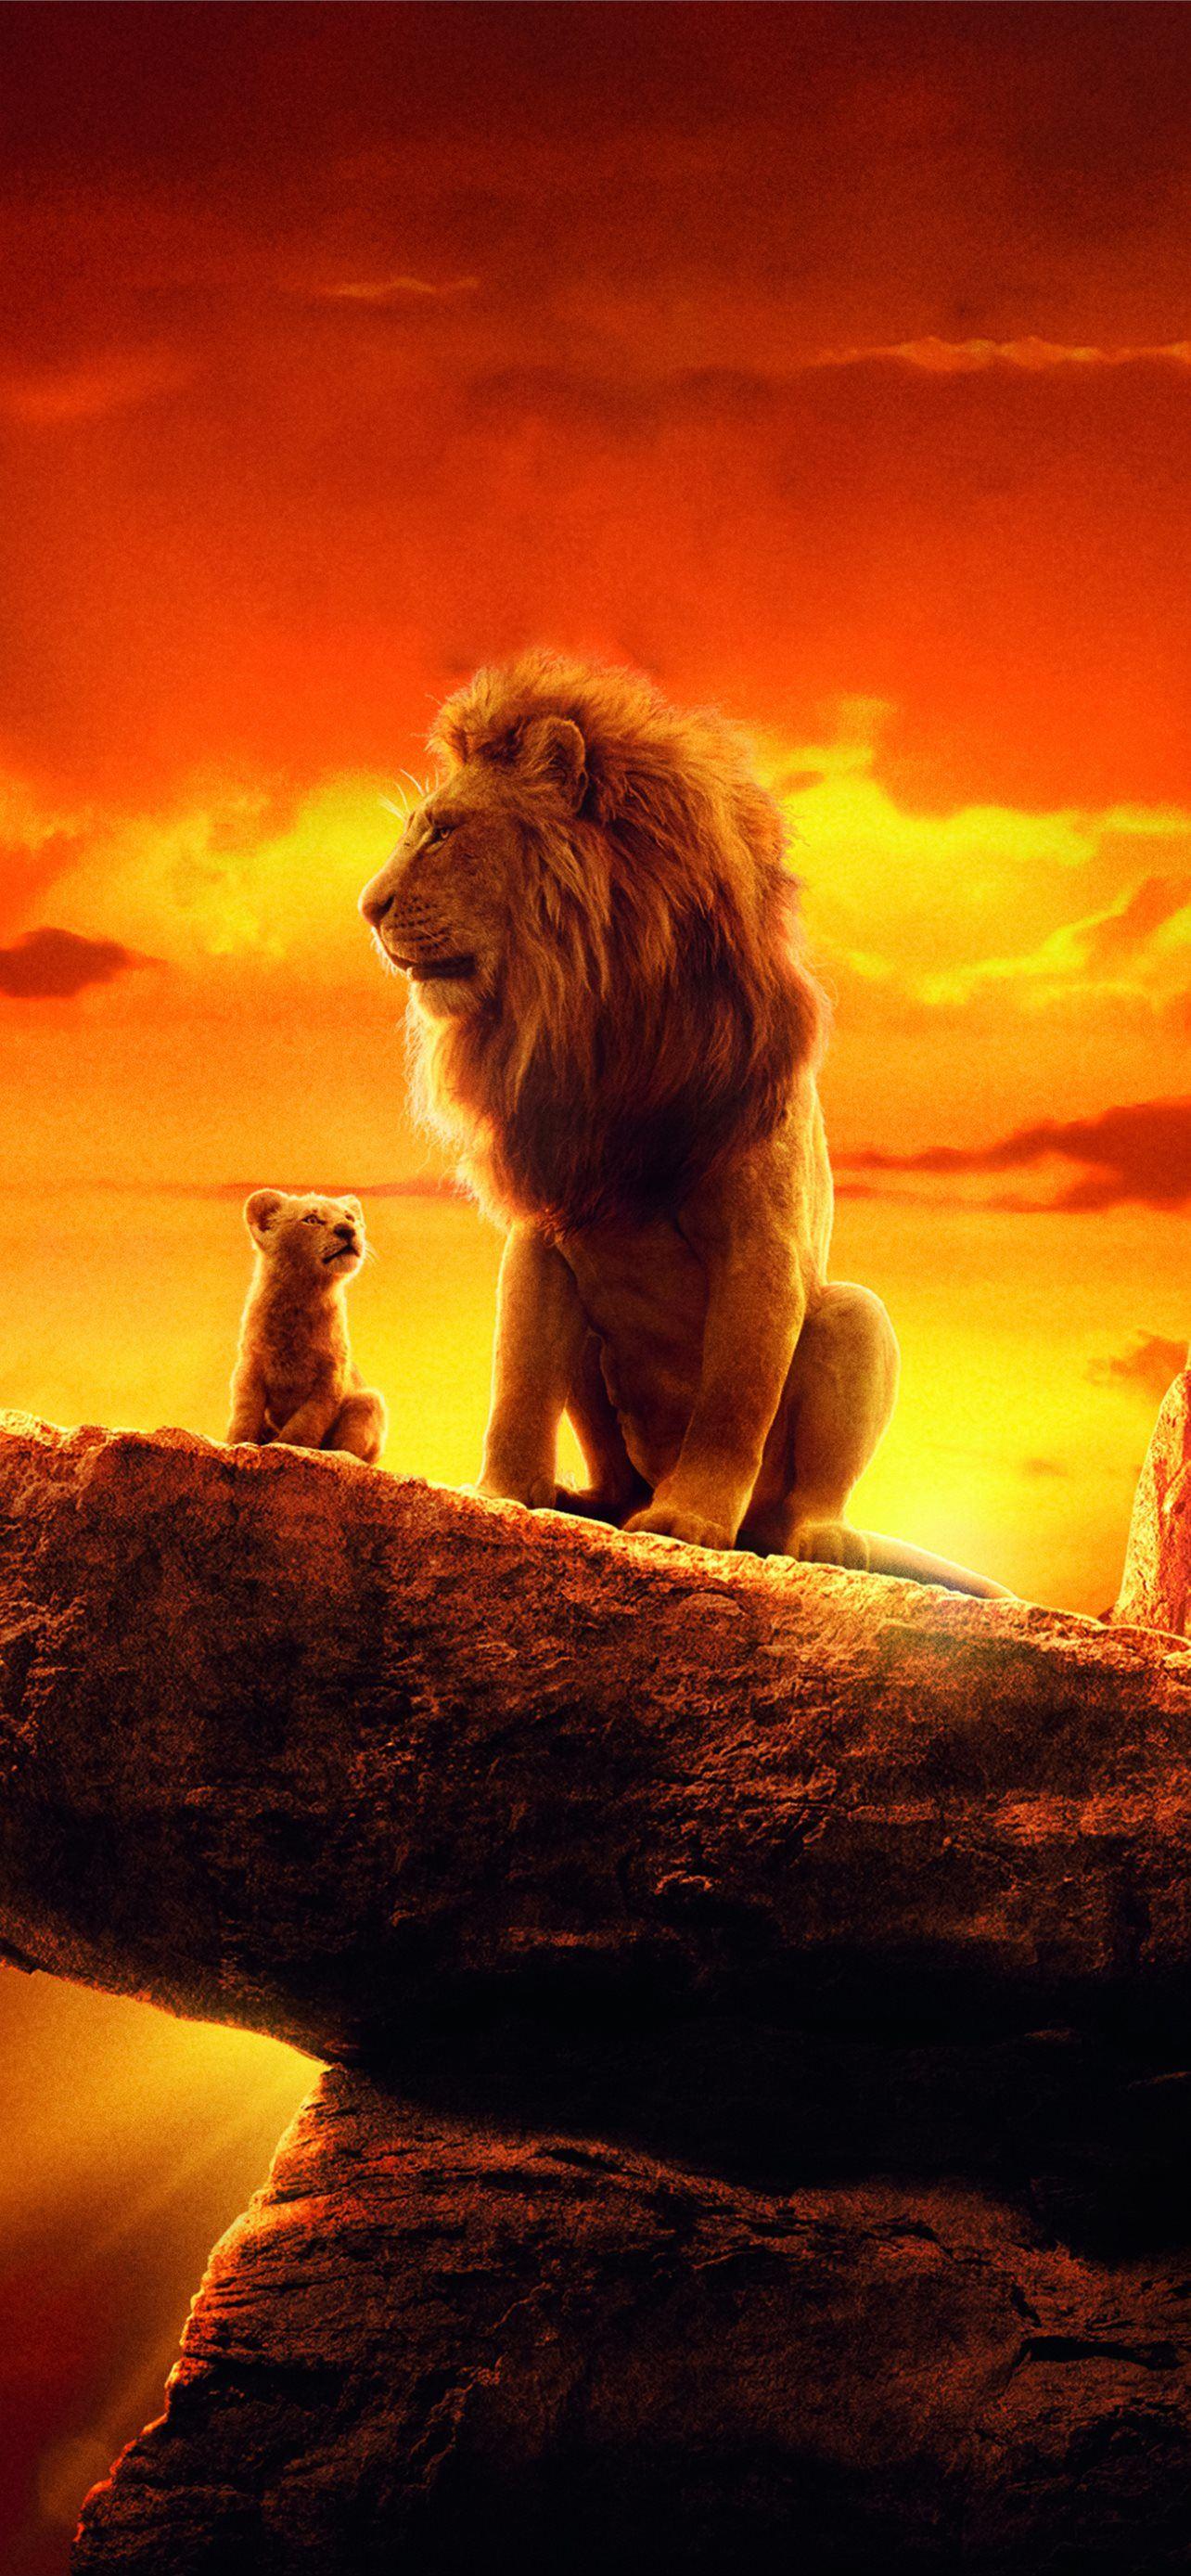 The Lion King 4k Movie Samsung Galaxy Note iPhone